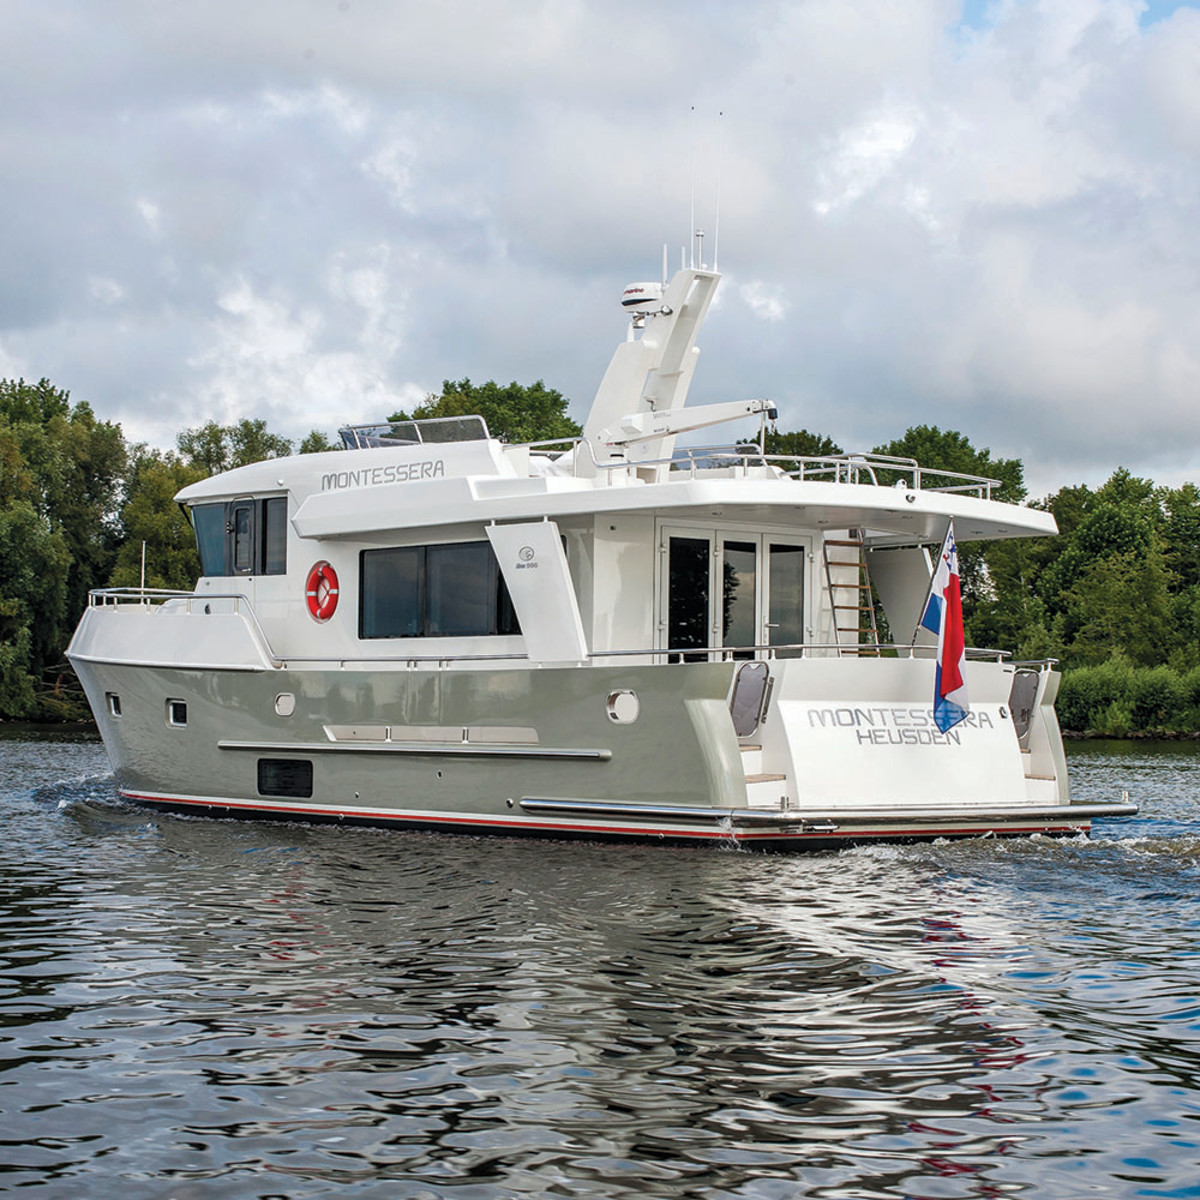 The Altena 50 features twin boarding steps from the swim platform, safe bulwark heights, large hawse pipes, and a design that blends traditional accents within a contemporary package.